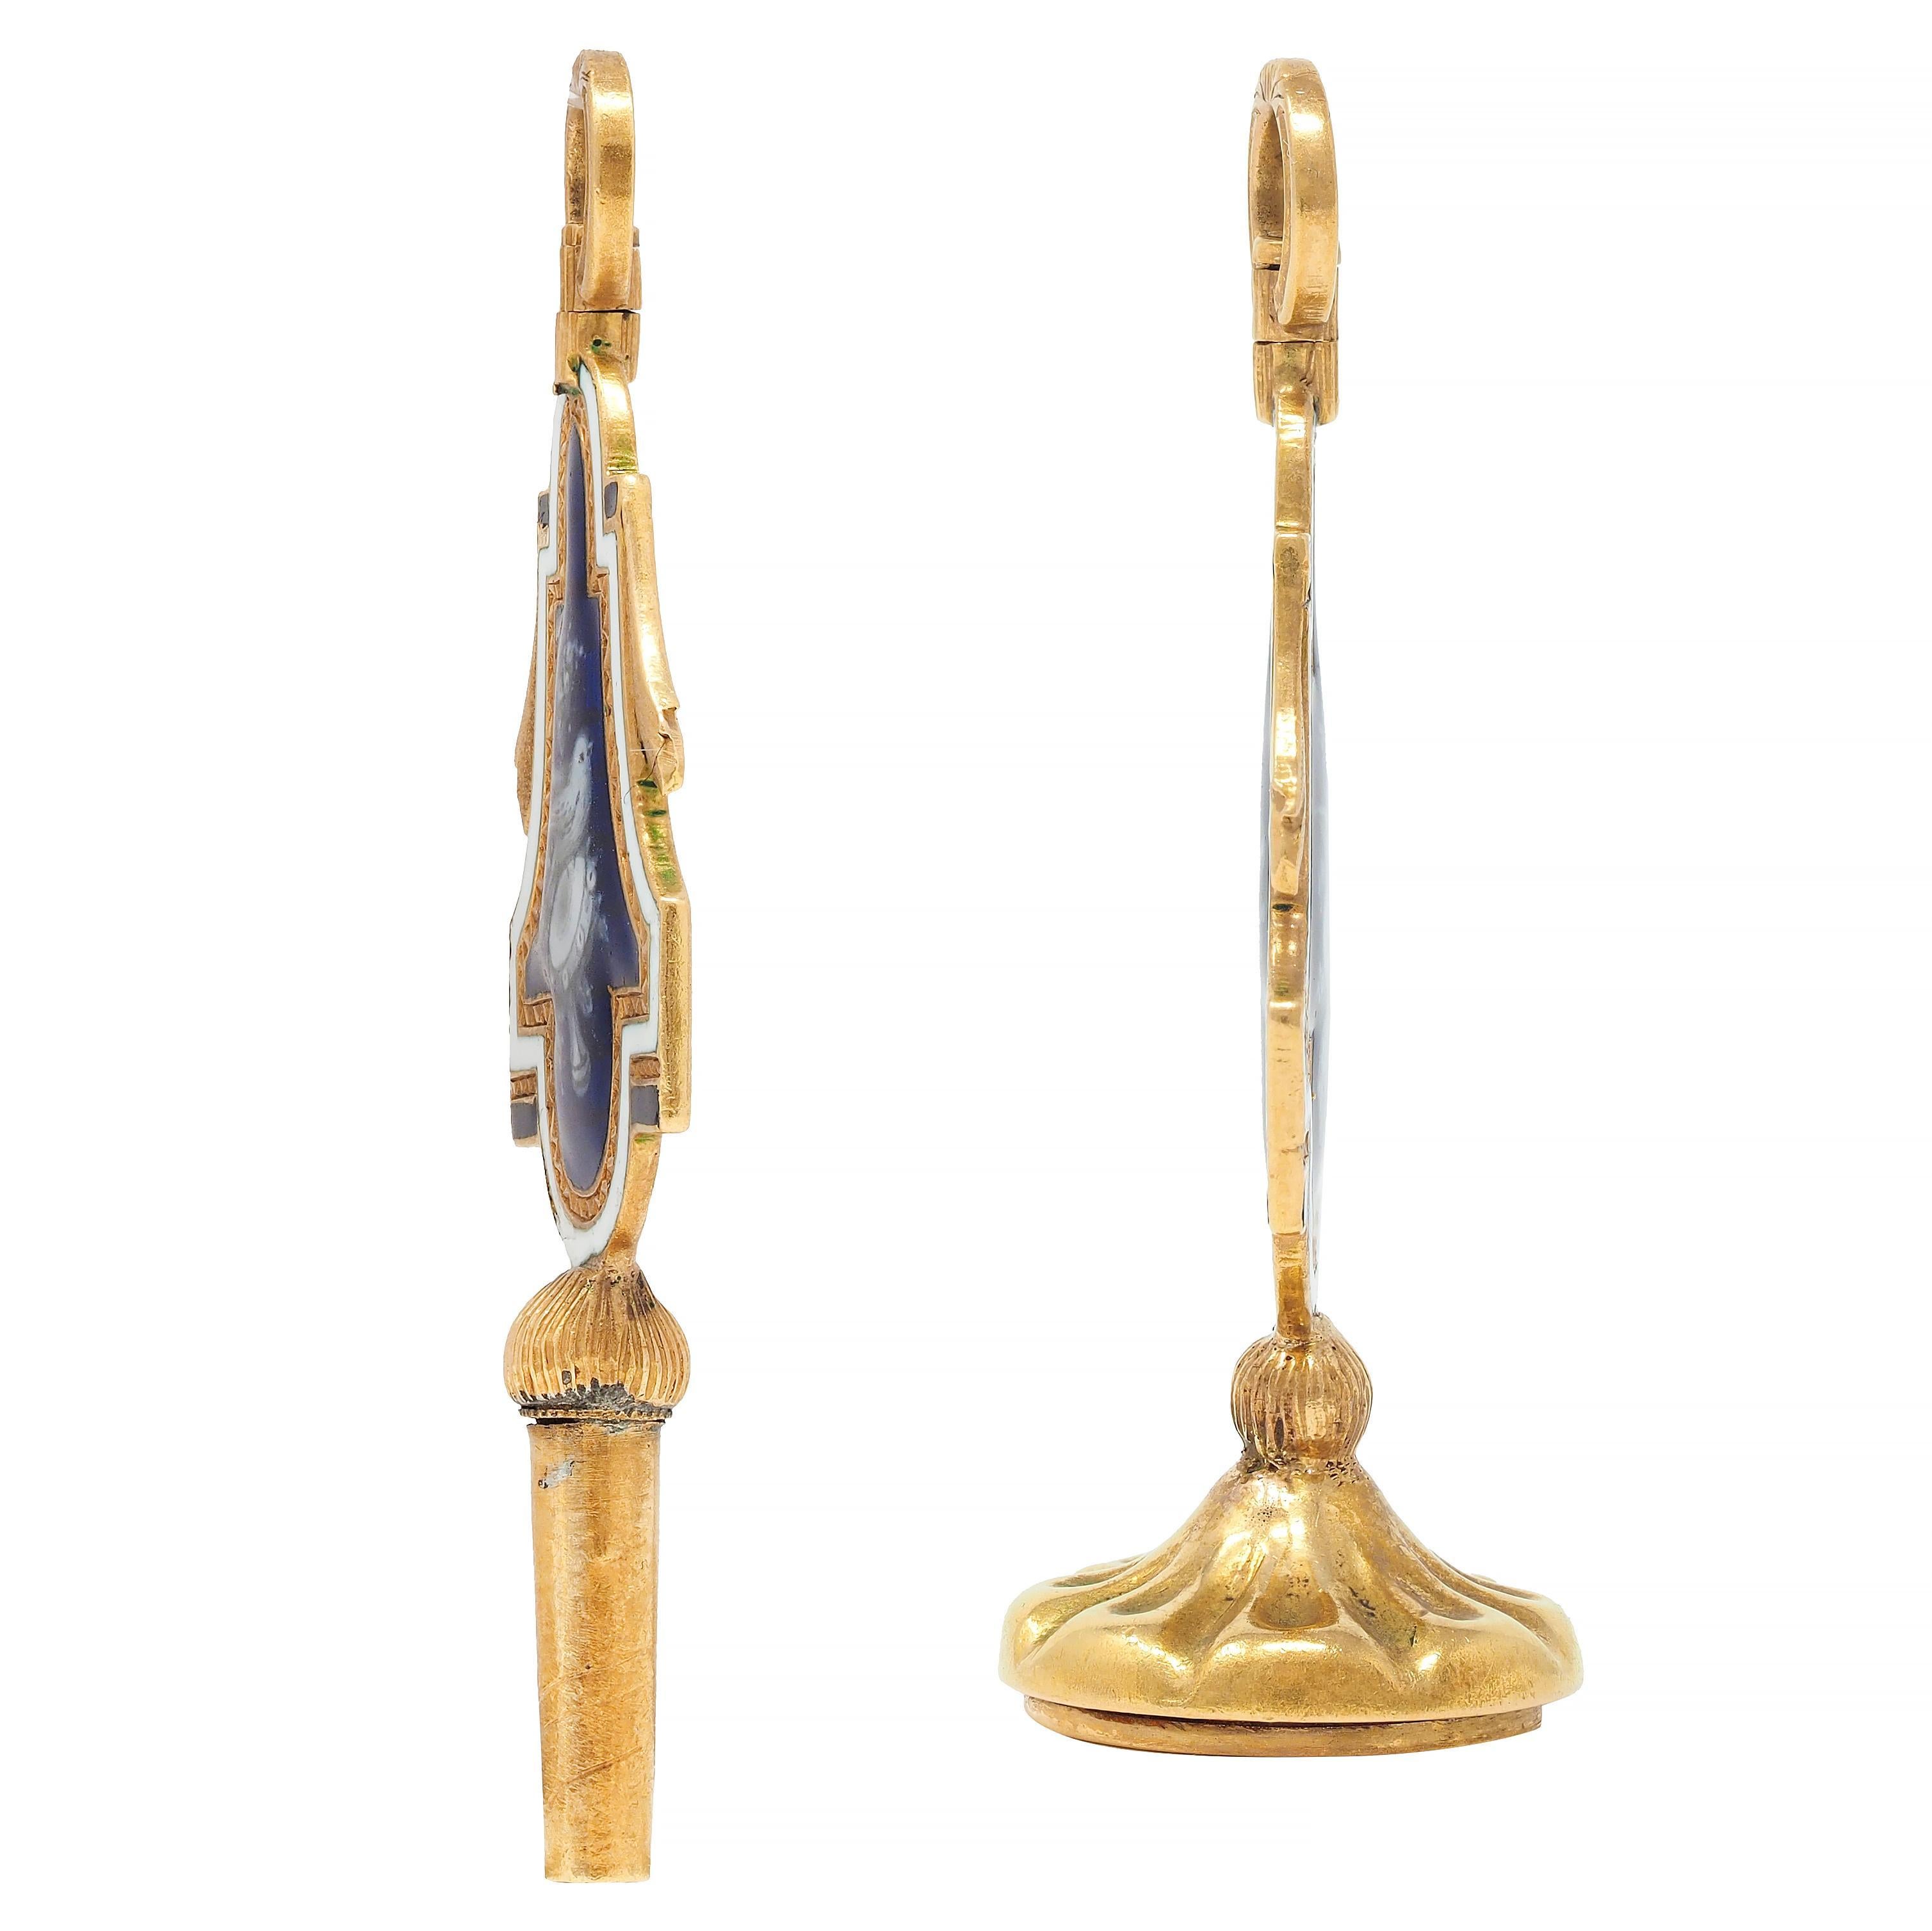 Designed as two matching fob pendants with cartouche-shaped forms centering painted enamel portraits
Depicting birds with foliates perched atop a lady's ribboned hat on one side and a lyre on the other
Opaque cobalt blue and white with engraved